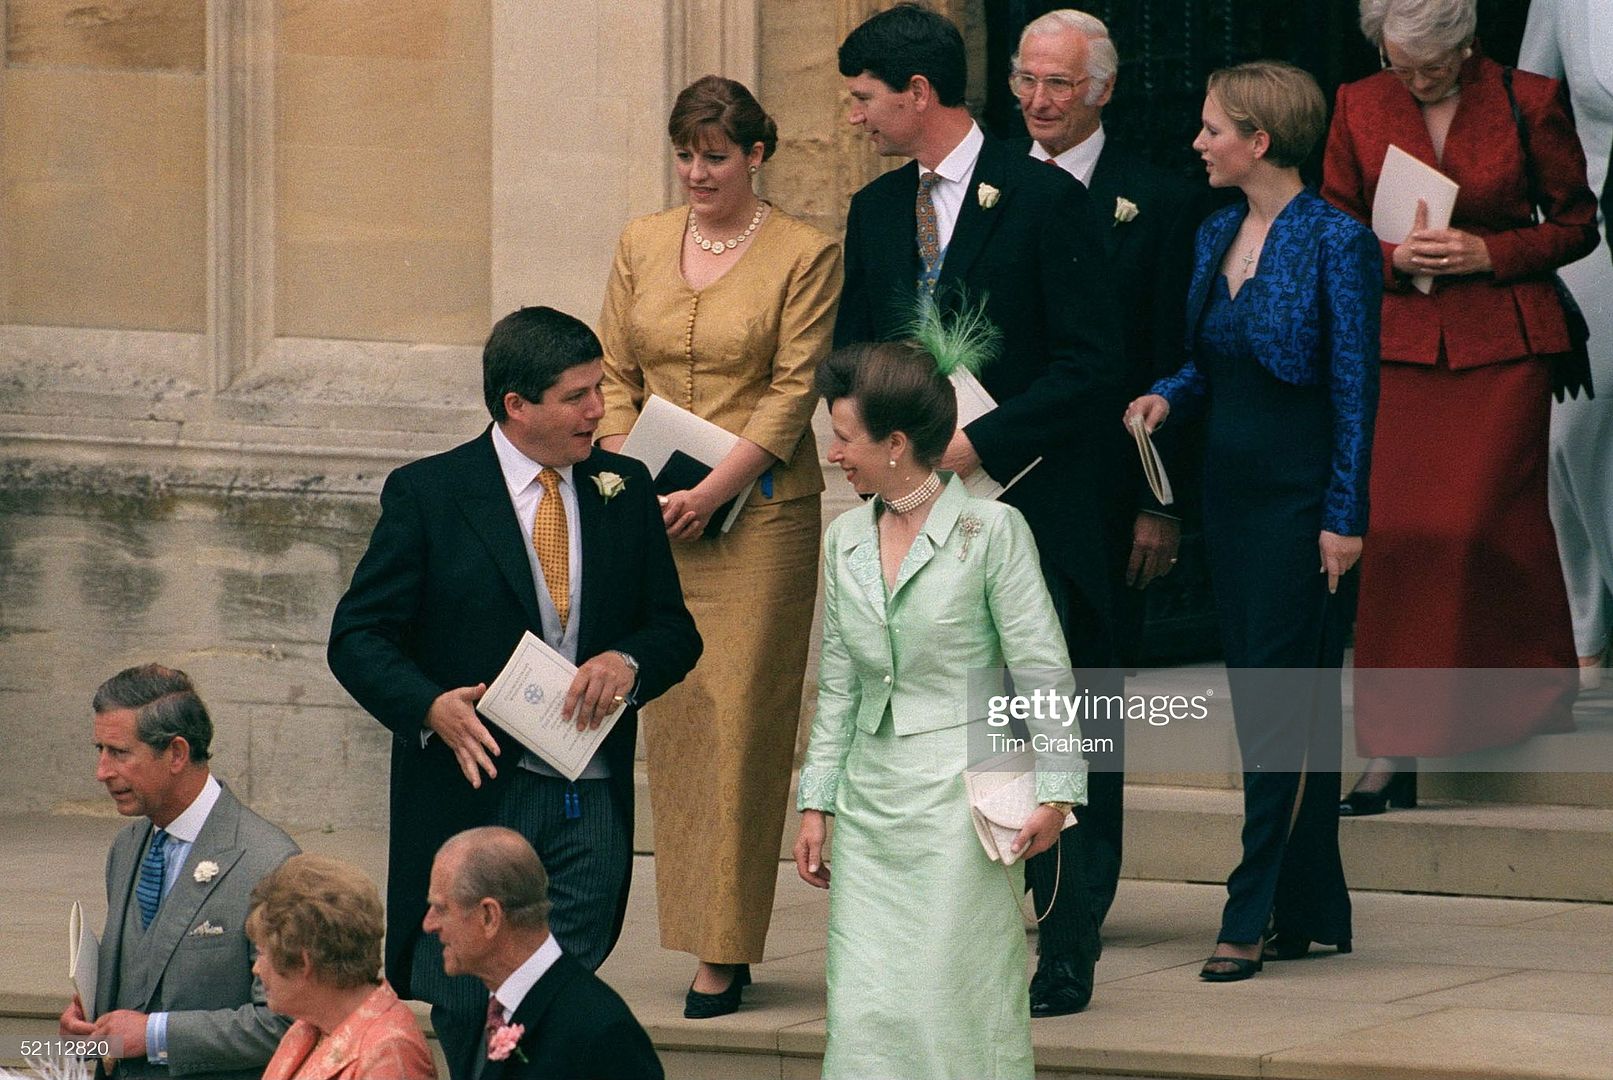 Princess_Anne_gettyimages-52112820-2048x2048